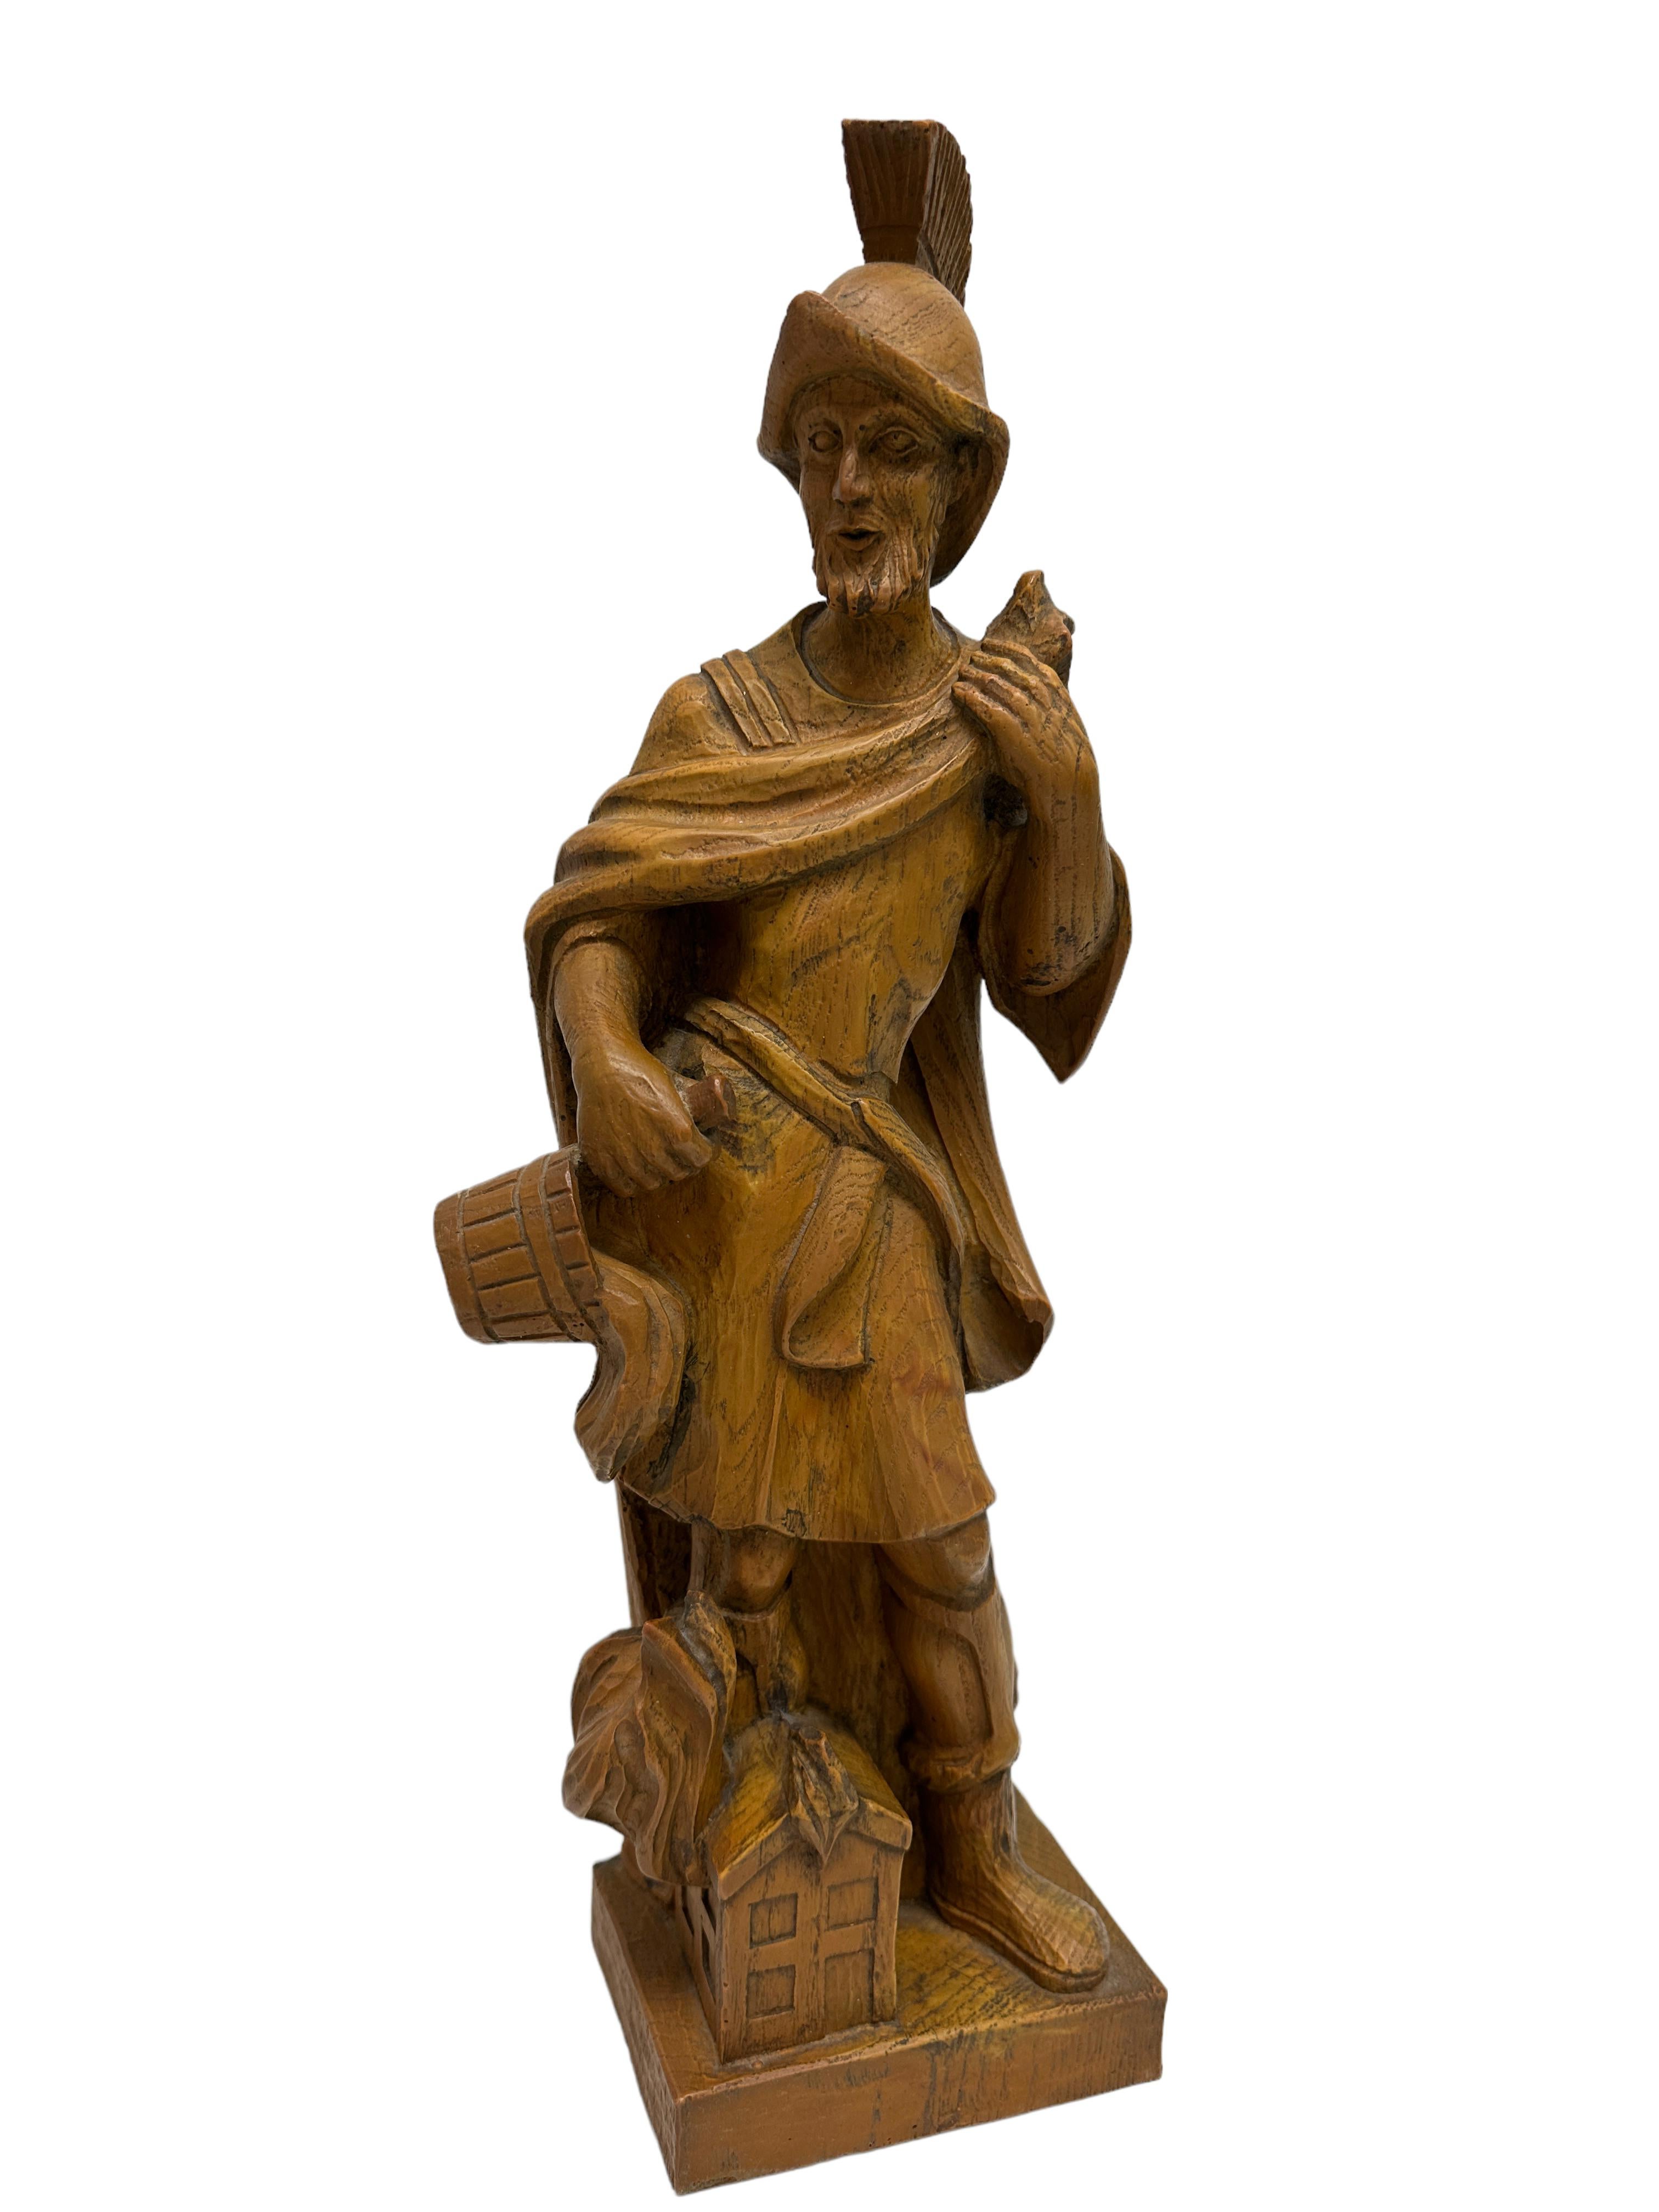 Pine carving of Saint Florian, the patron saint of fire fighters, 20th century Austria, the saint shown holding his cape in one hand, pouring a bucket of water over a burning building with the other. With an manufactory mark at the base. Found at an